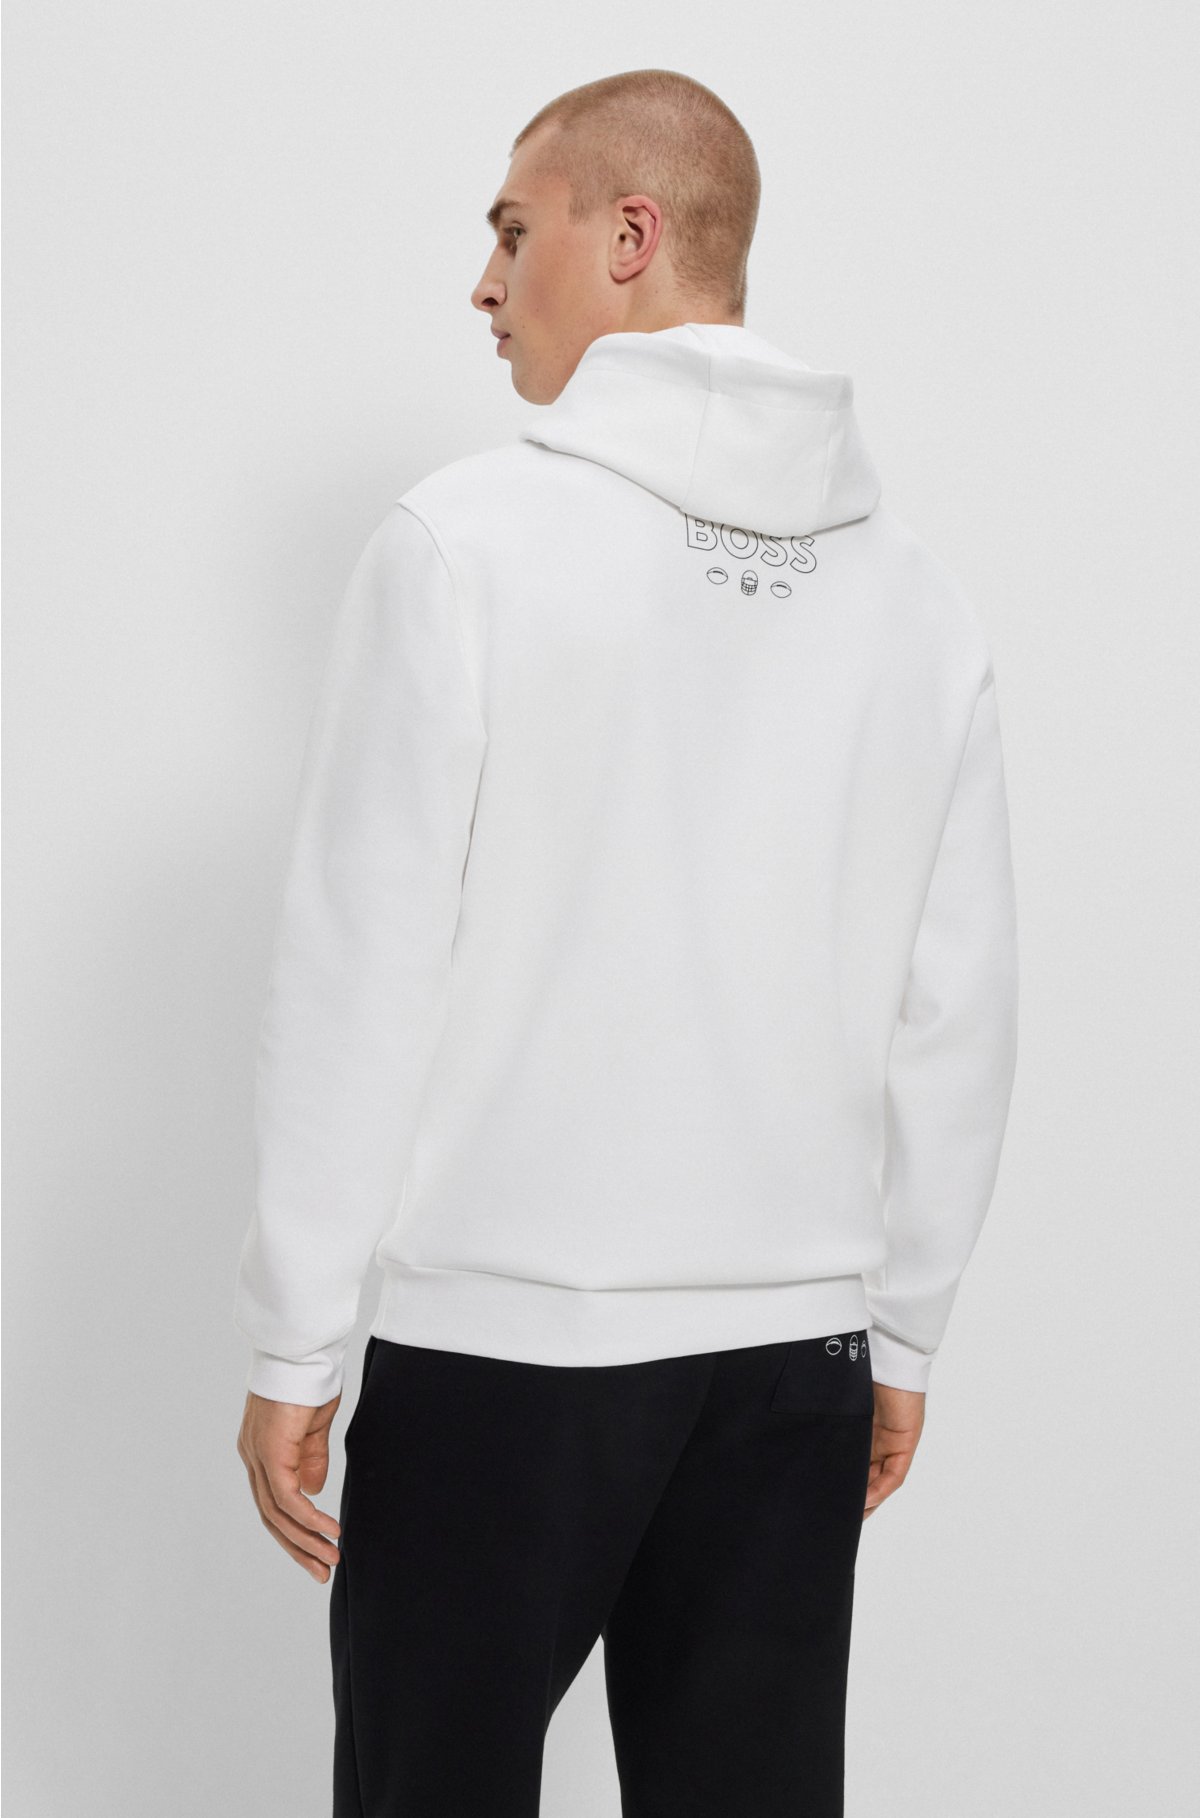  BOSS x NFL cotton-blend hoodie with collaborative branding, Raiders